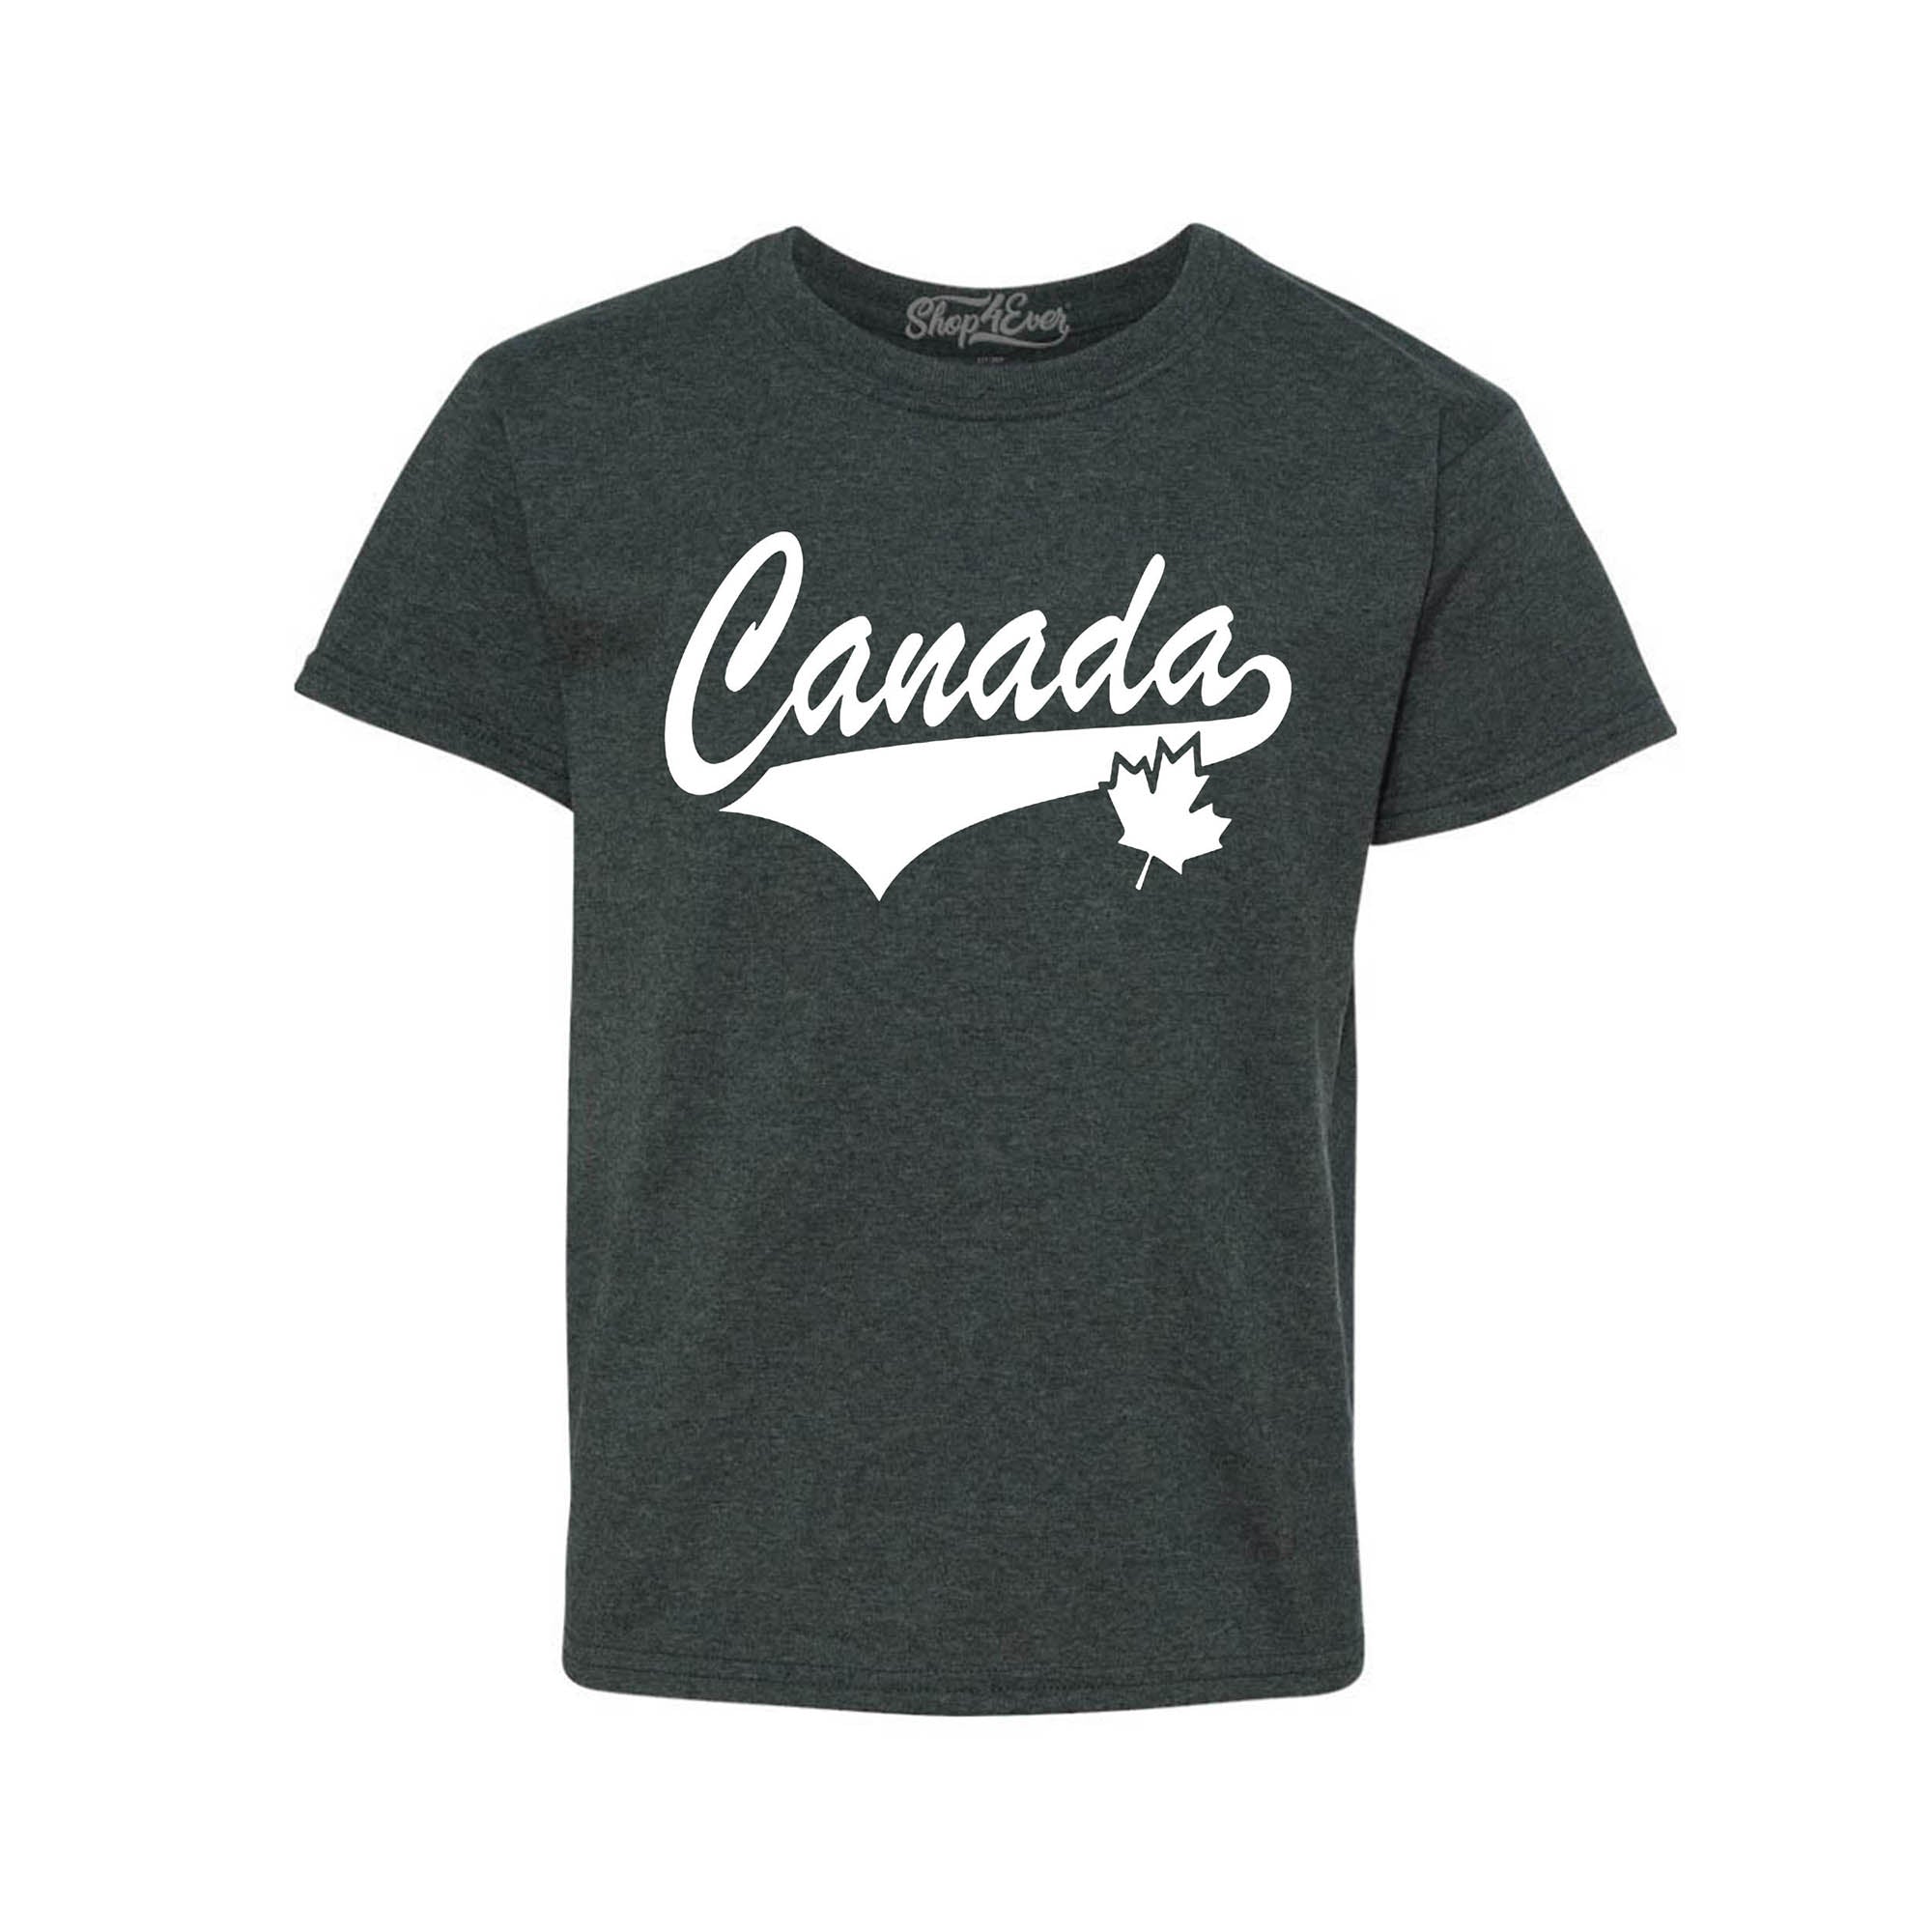 Canada White Youth's T-Shirt Canadian Child Kids